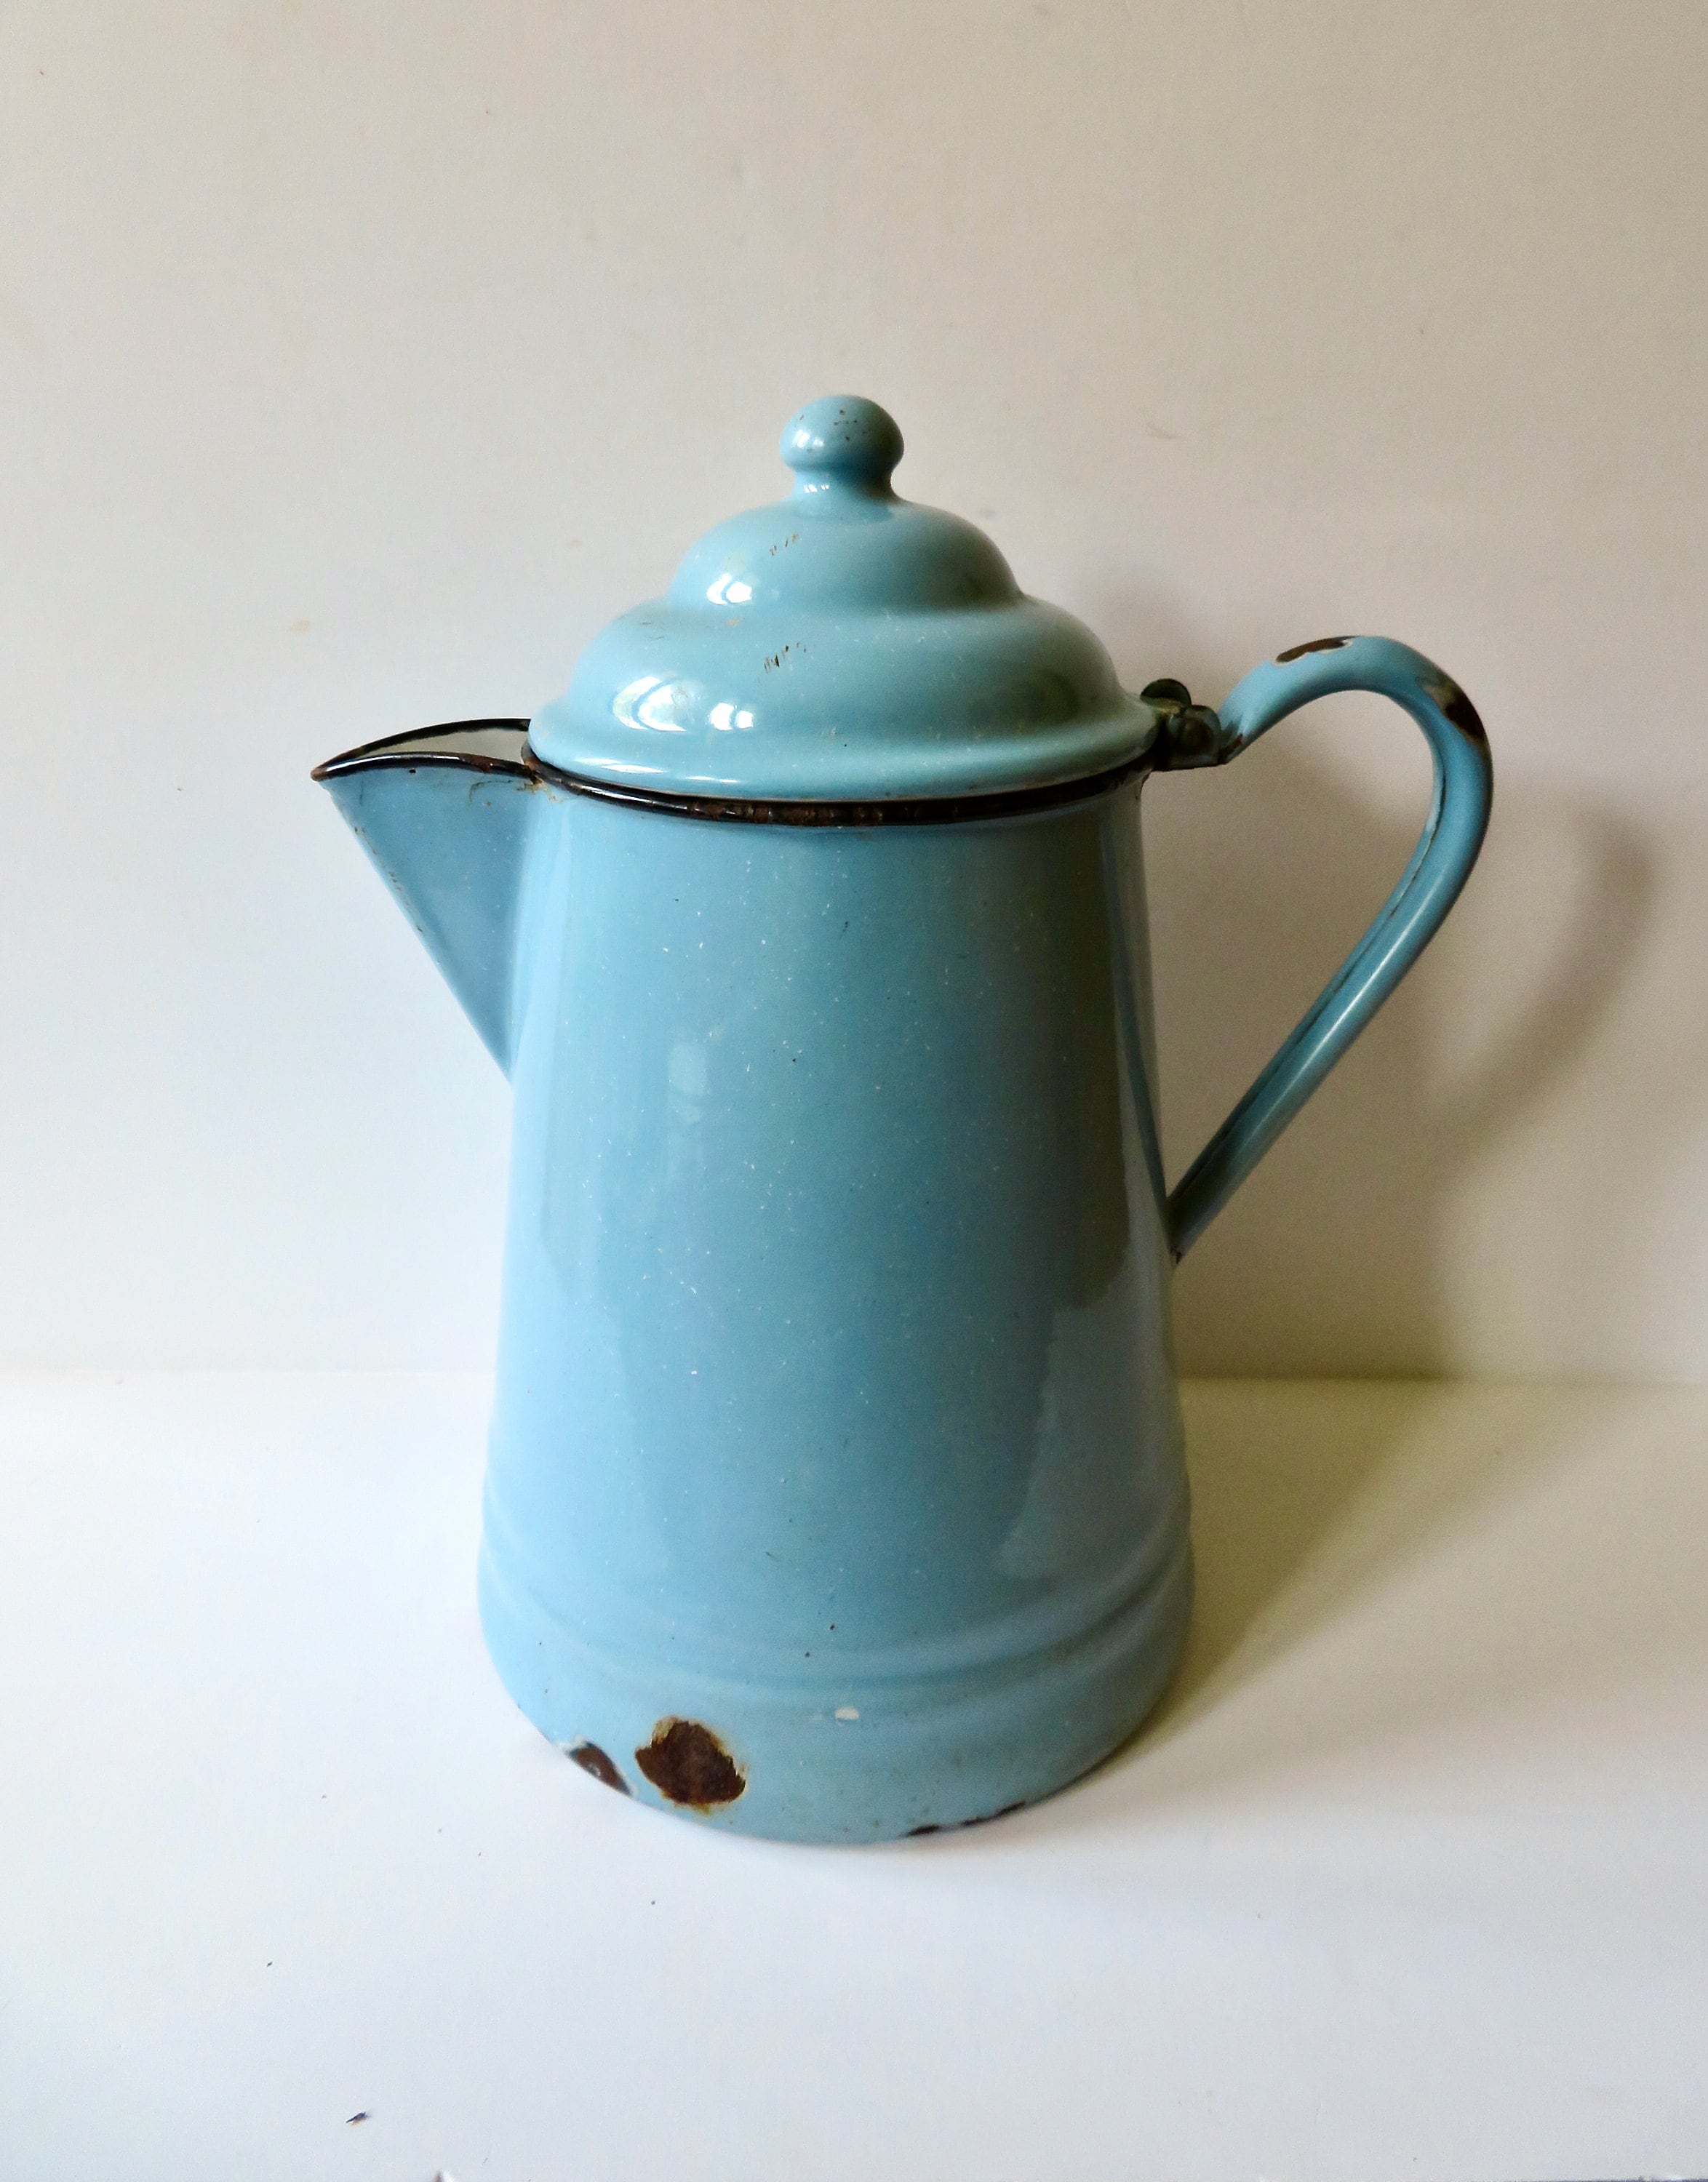 Bargain John's Antiques  Antique Graniteware Blue and White Coffee Pot  with Removable Lid - Bargain John's Antiques